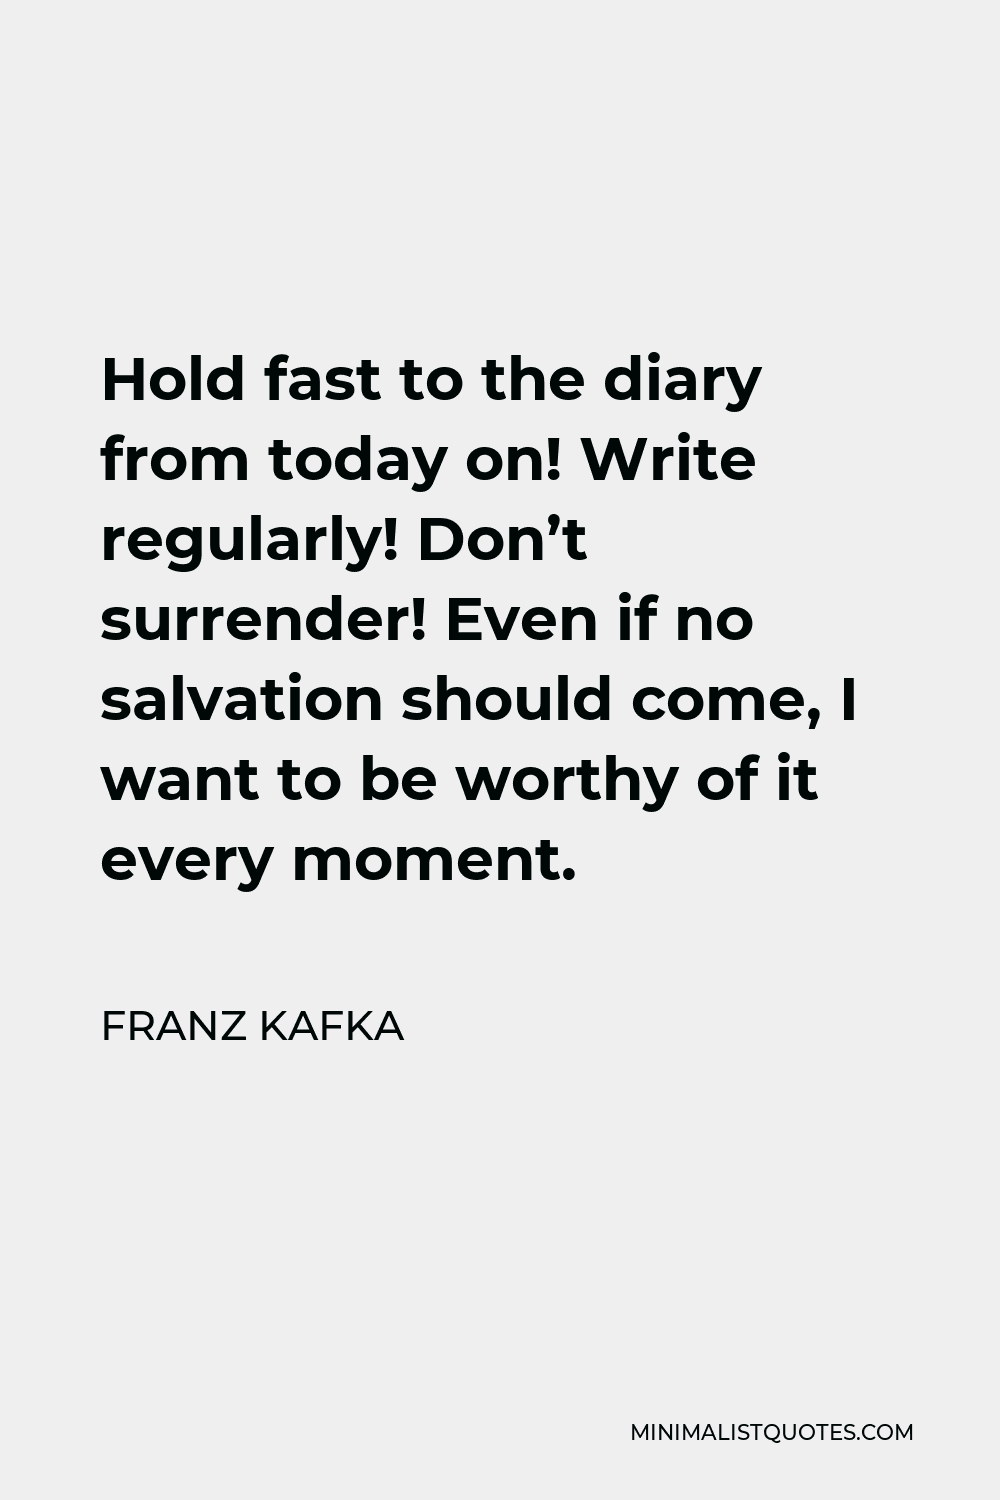 Franz Kafka Quote - Hold fast to the diary from today on! Write regularly! Don’t surrender! Even if no salvation should come, I want to be worthy of it every moment.